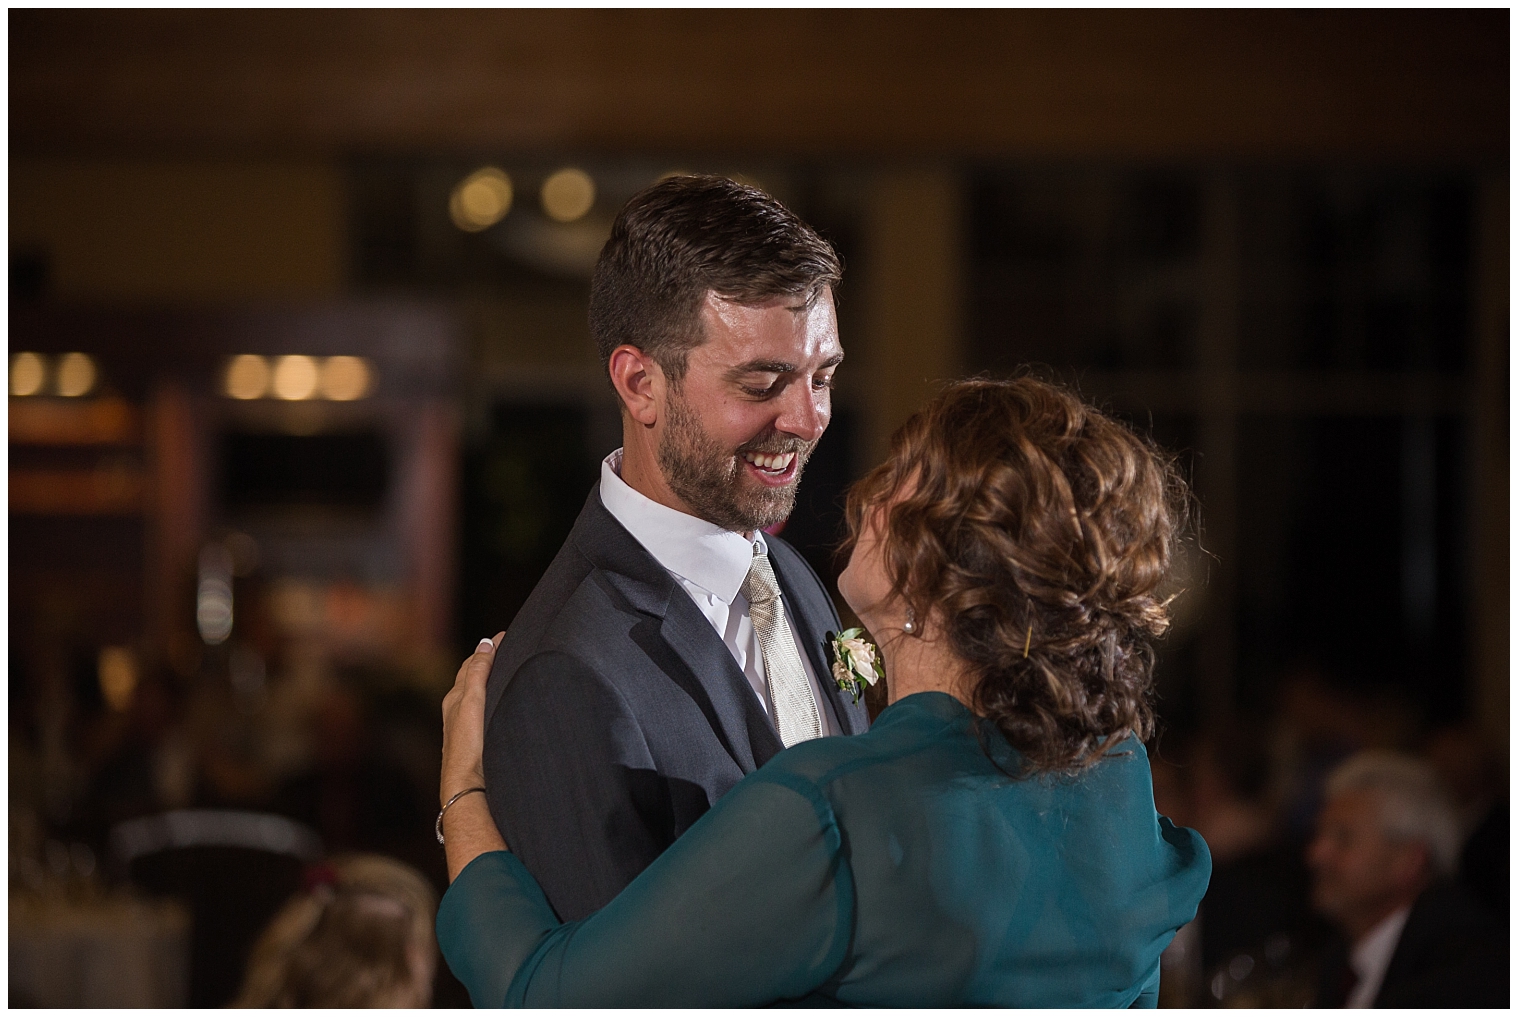 The groom smiles while dancing with his mother in the mother-son dance.